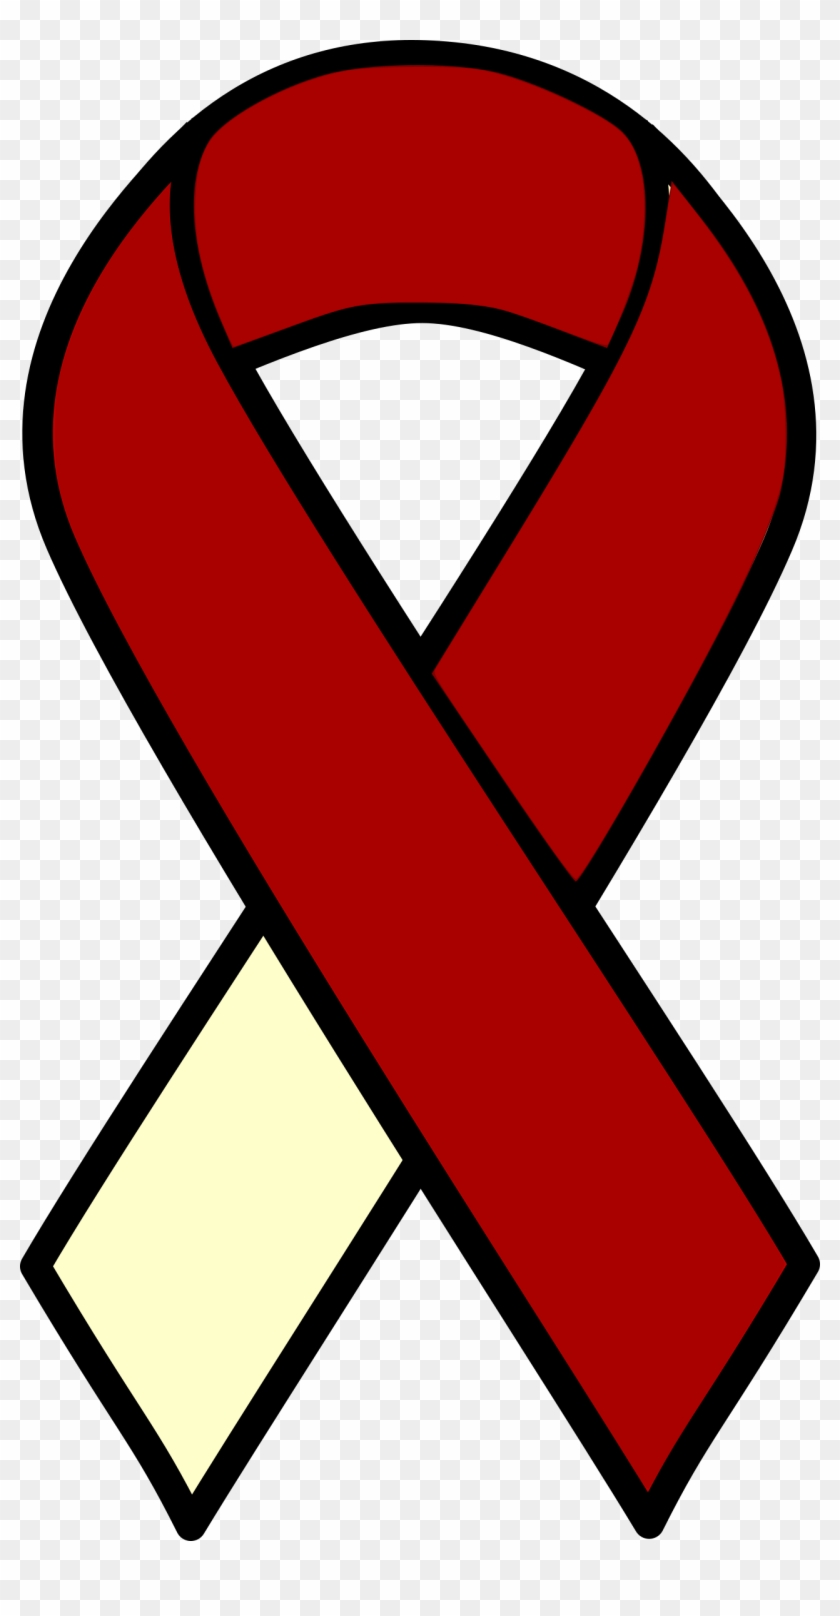 Cancer Ribbon Clipart Hostted - Head And Neck Cancer Ribbon #187251